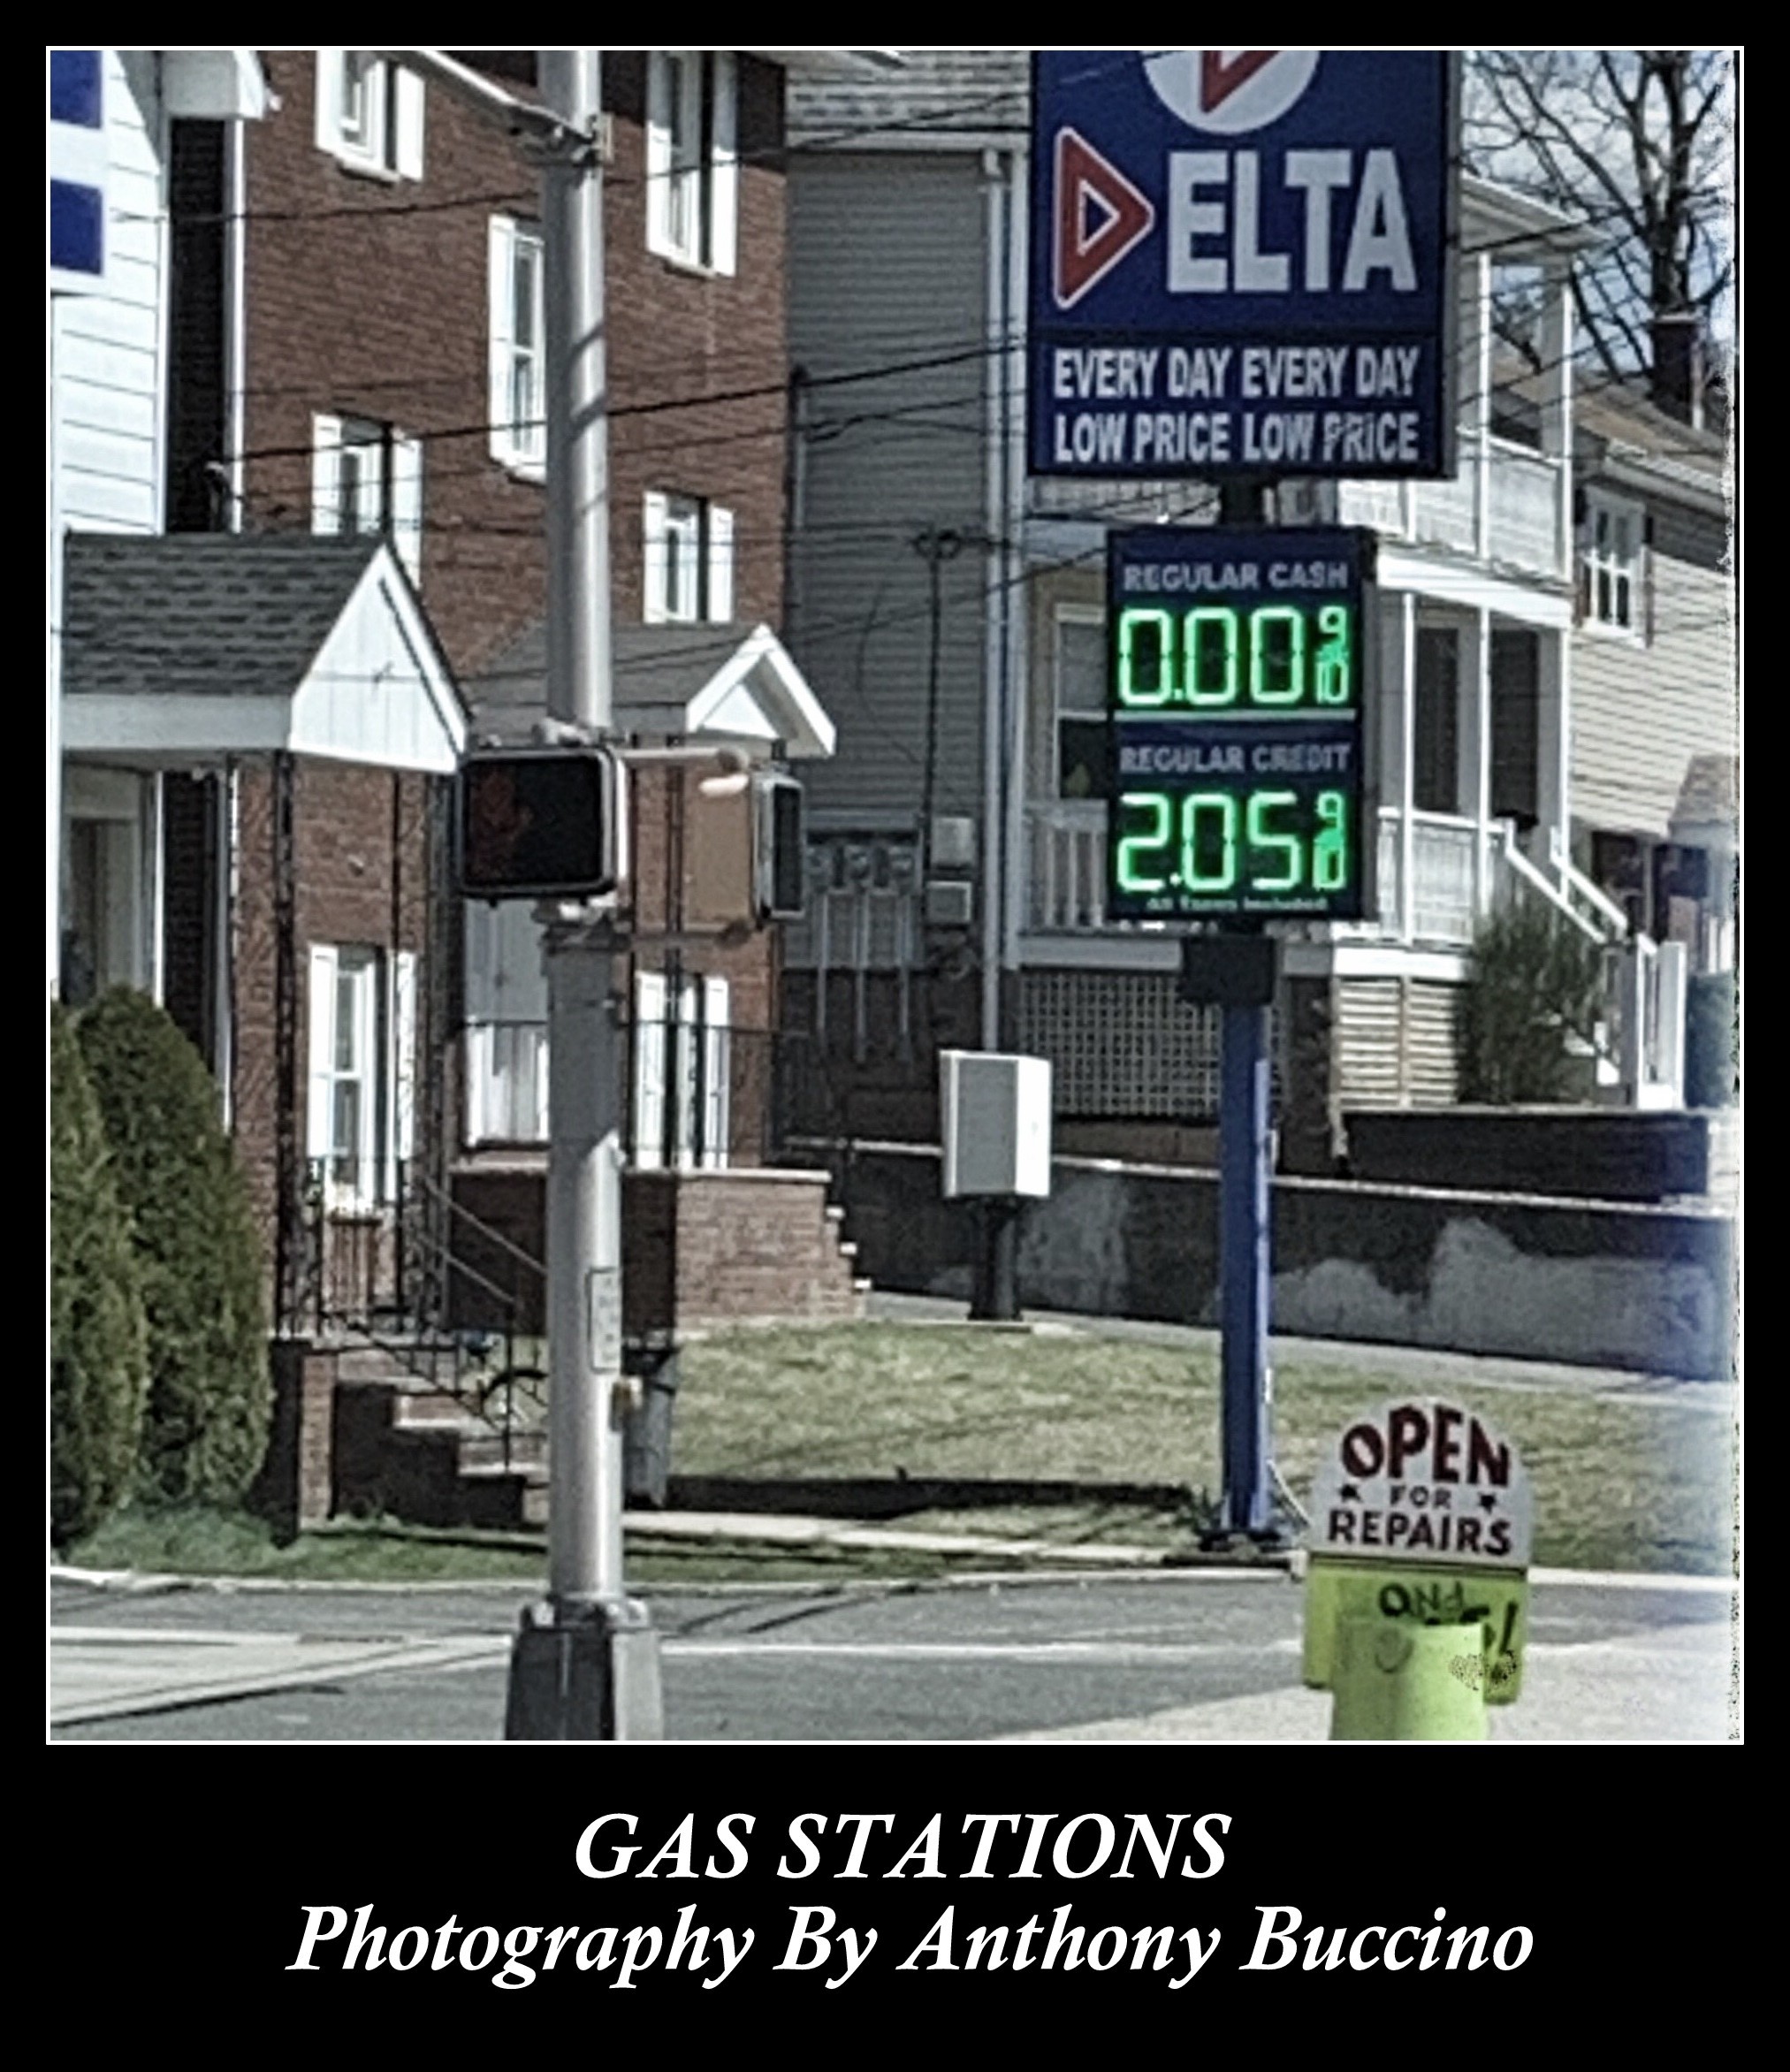 GAS STATIONS Photography By Anthony Buccino, on Kindle from Amazon